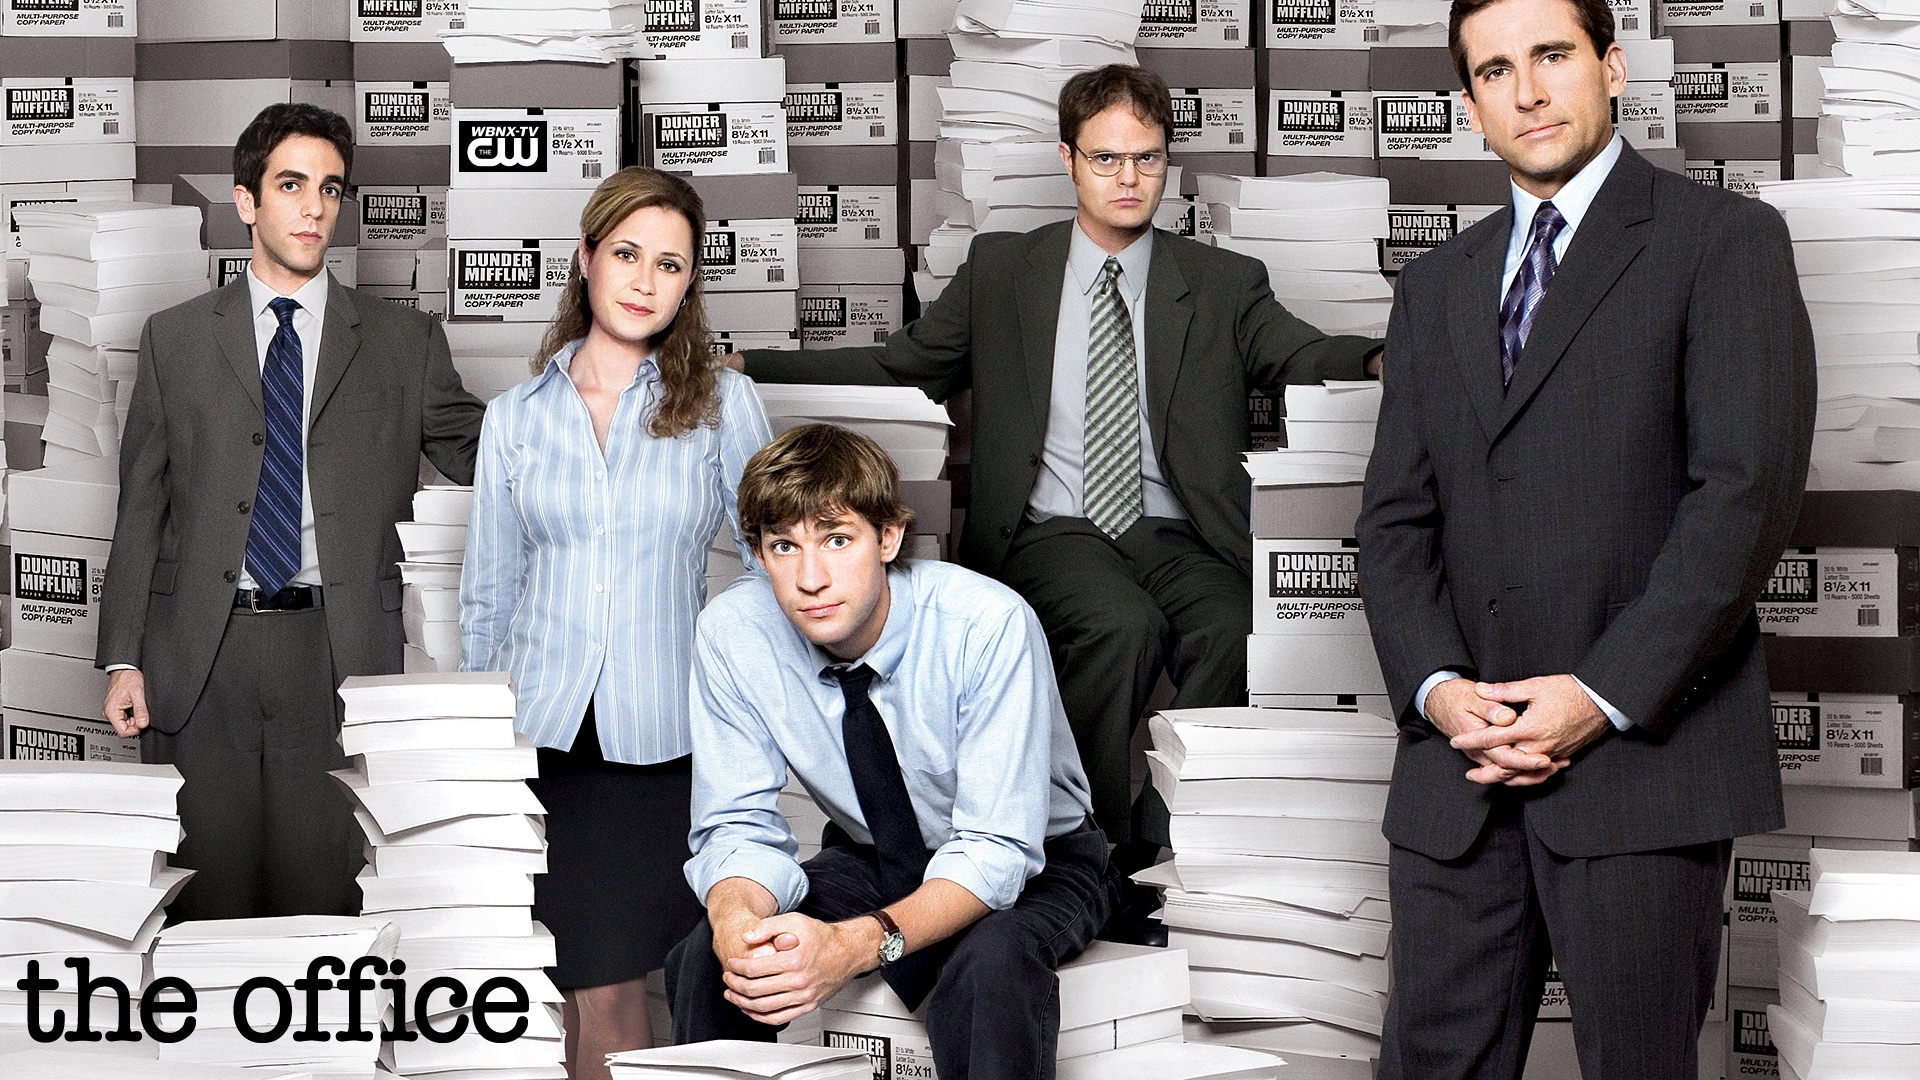 The Office for 1920 x 1080 HDTV 1080p resolution